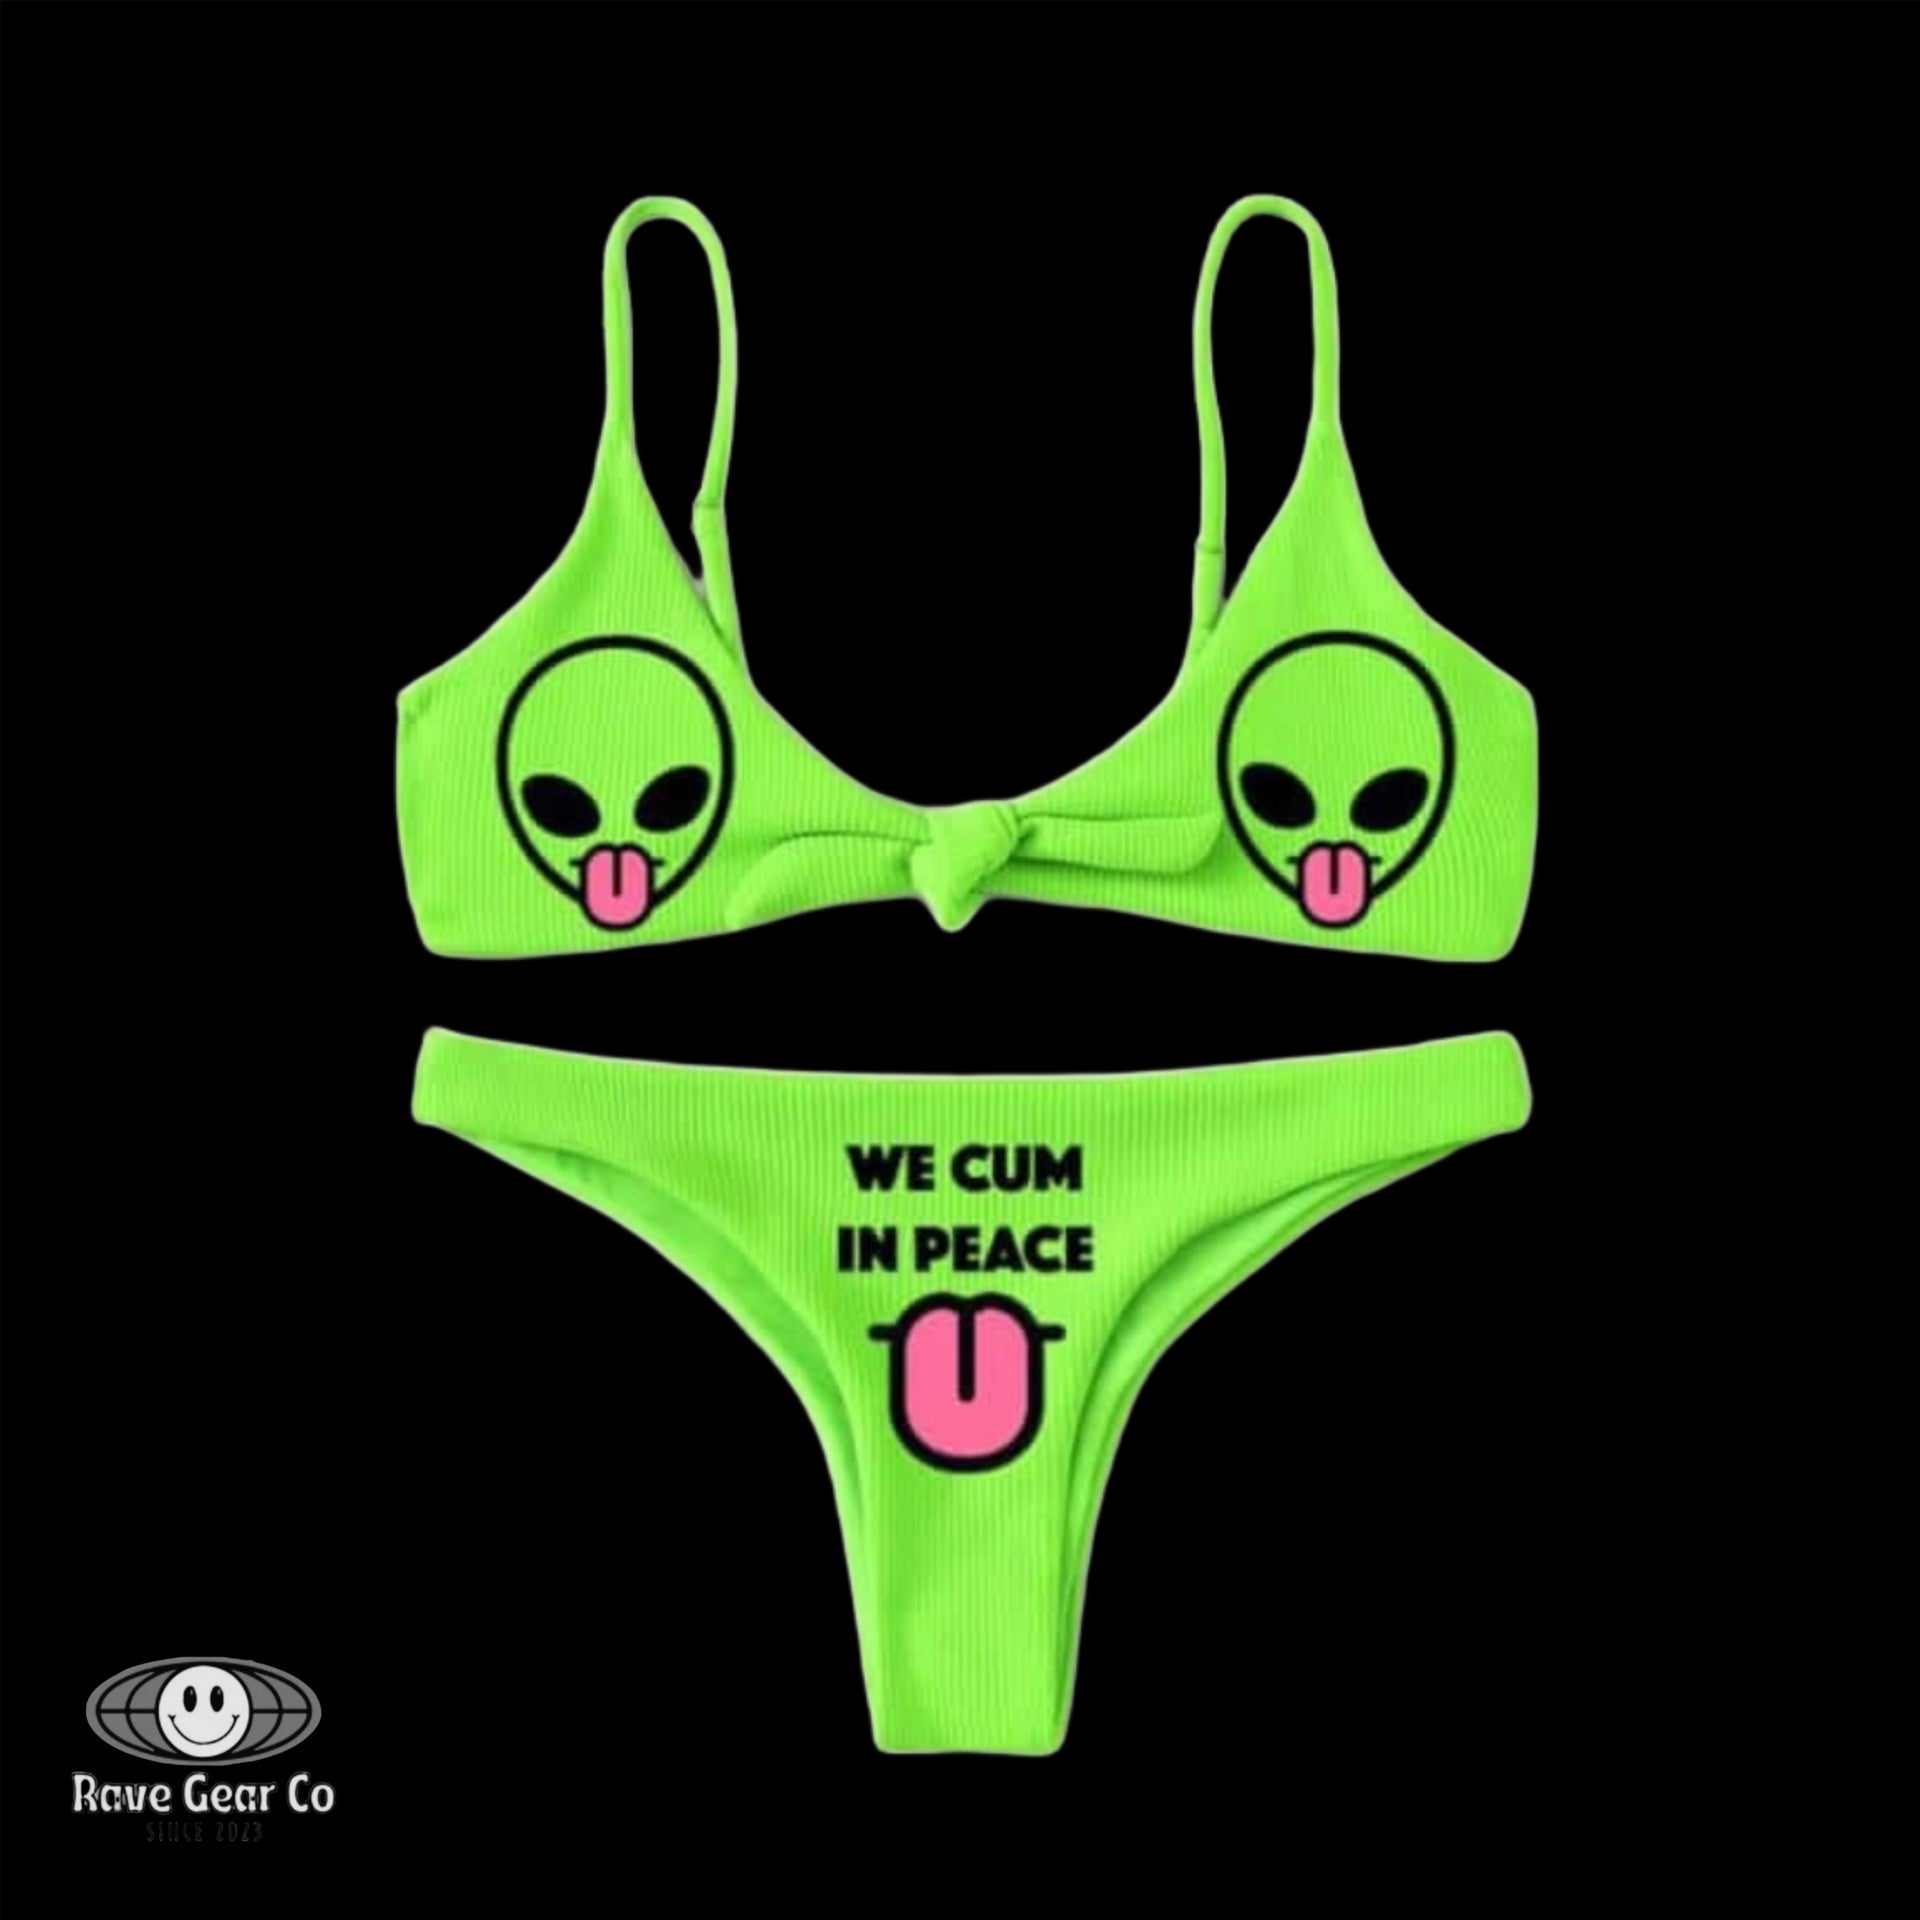 Rave Gear - We Cum In Peace Bikini Set: A Playful Alien-Themed Rave Outfit